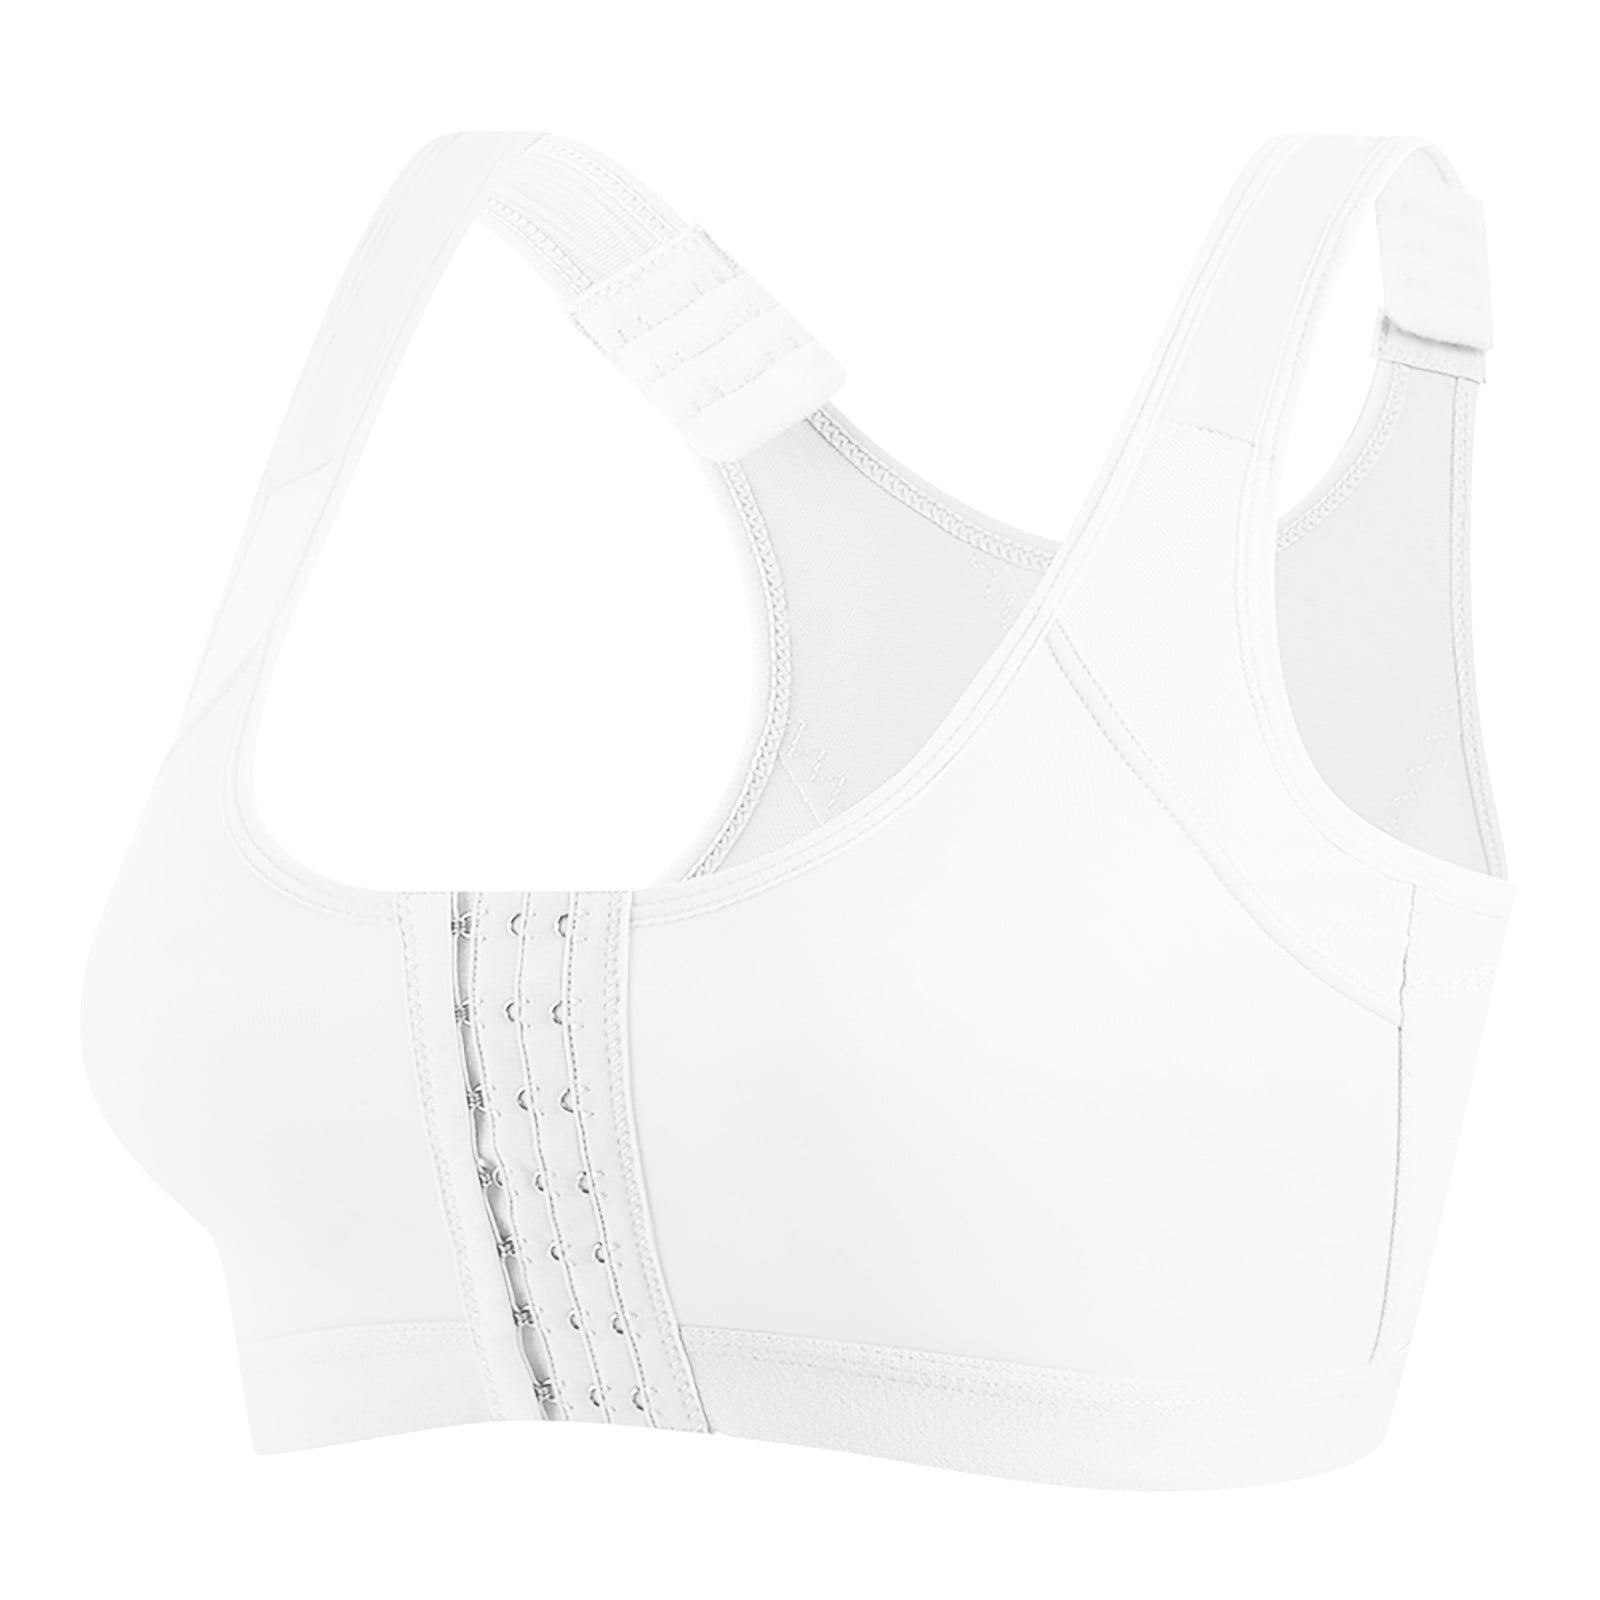 AIYIHAN Women's Yoga Sports Bra Wirefree Double Lined T-Back White